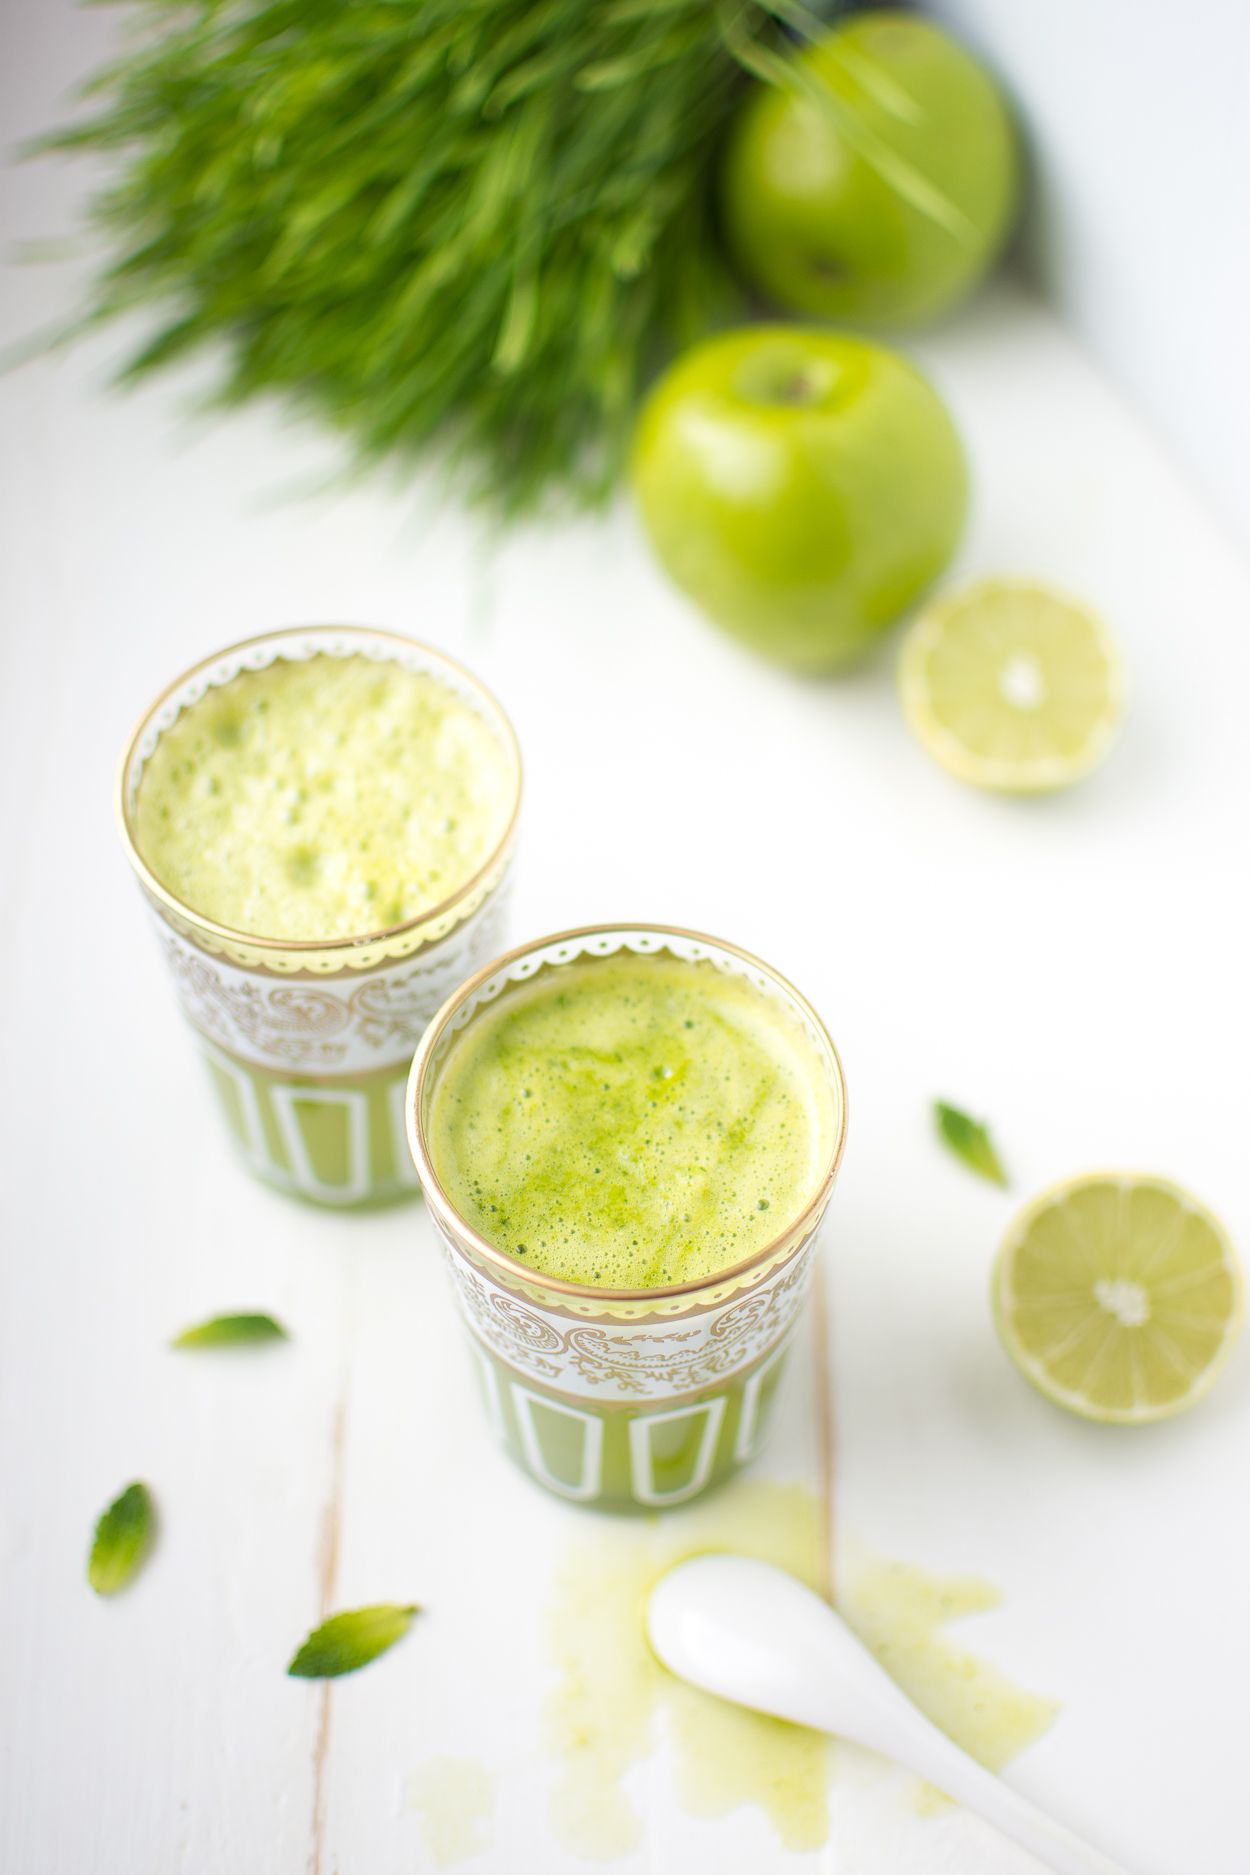 Super Green Morning Tonic in glass with apples, lime and wheatgrass in background